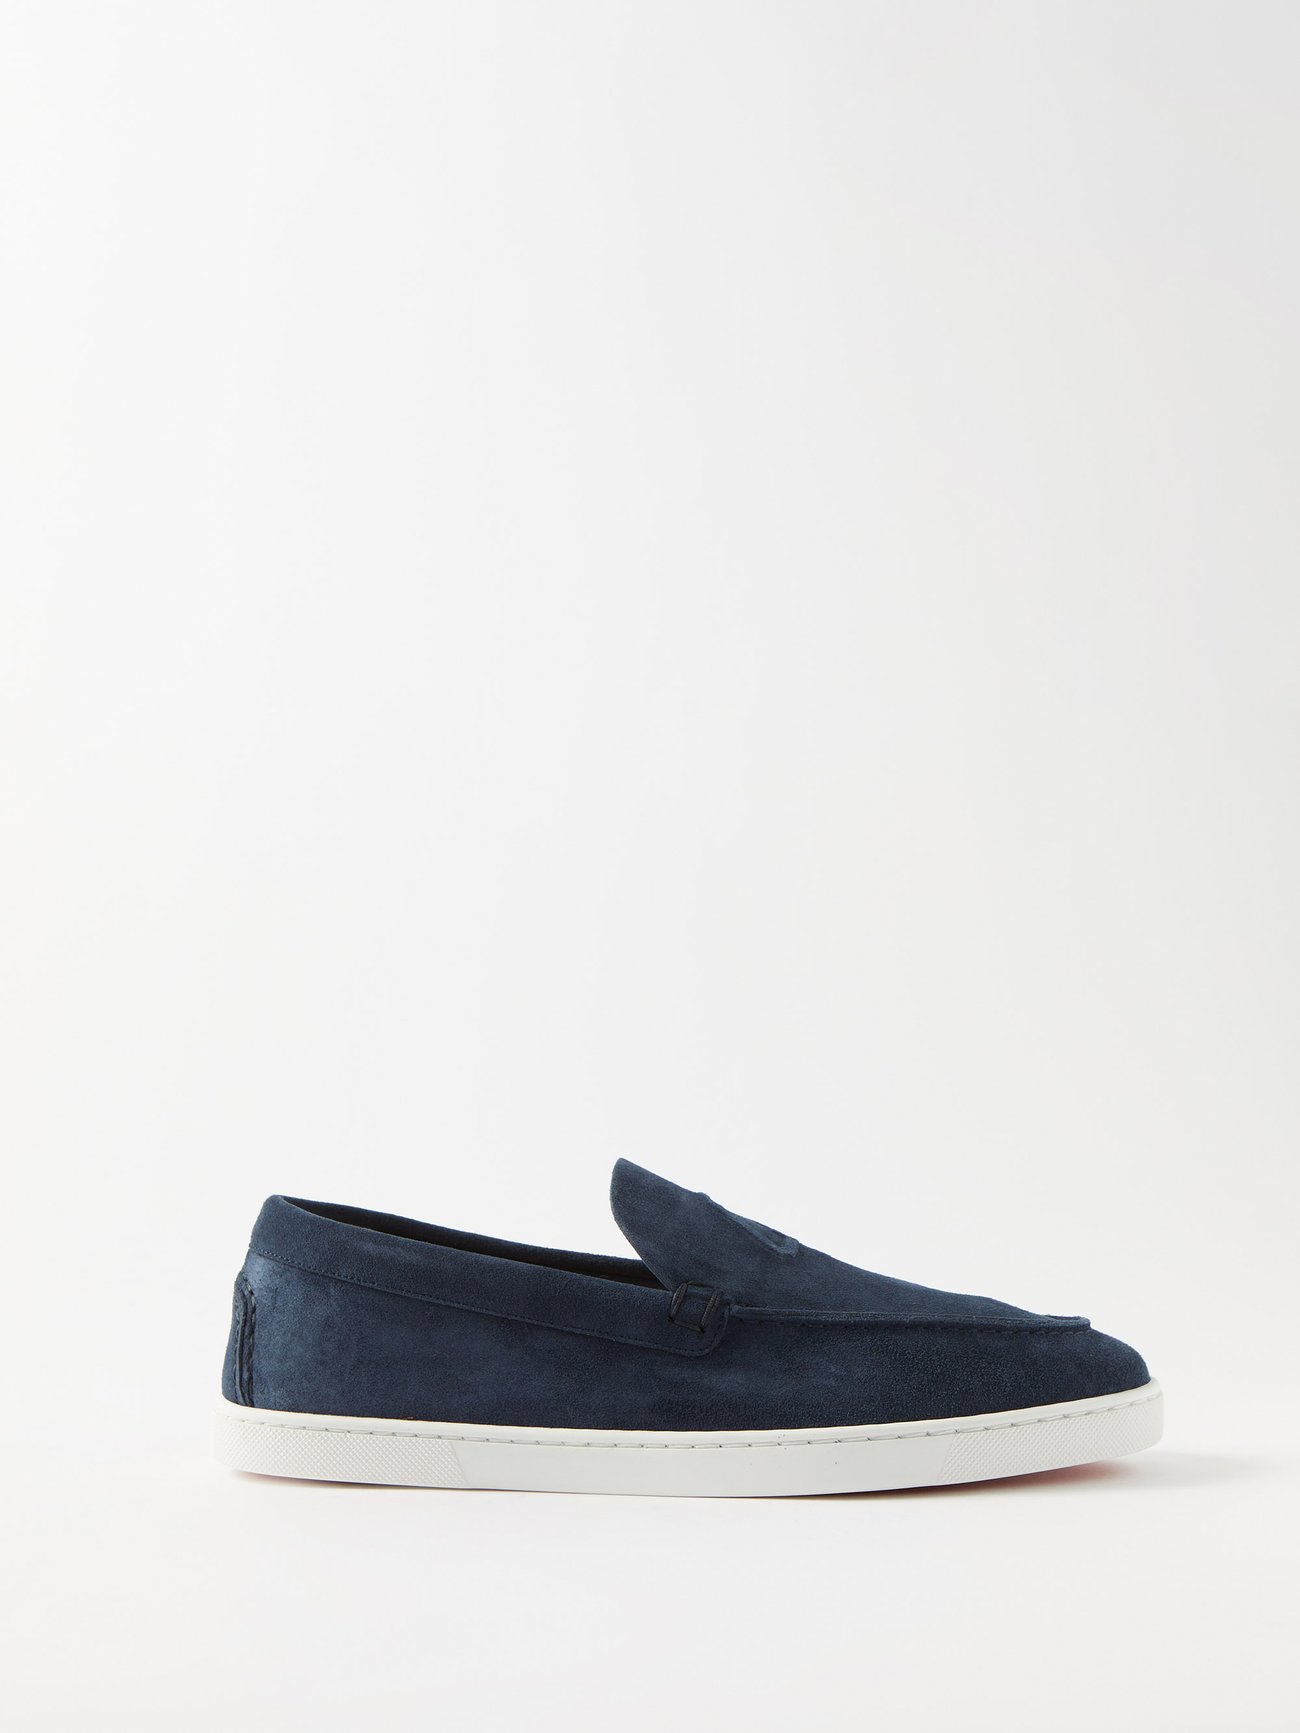 NEW CHRISTIAN LOUBOUTIN MOCCASIN SHOES 40.5 BLUE SUEDE NEW SHOES